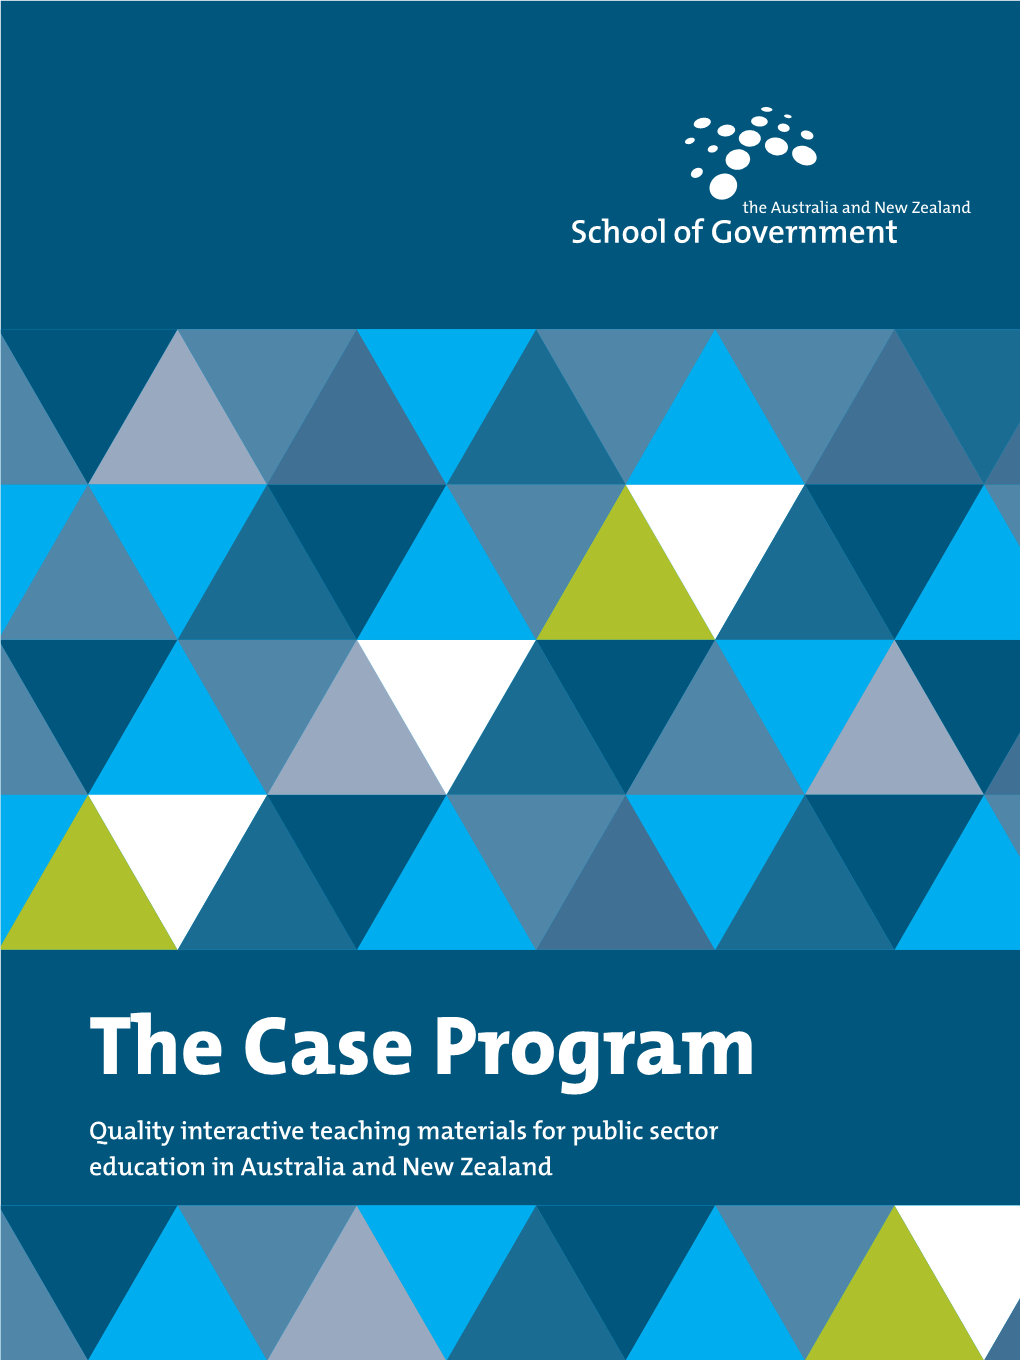 The Case Program Quality Interactive Teaching Materials for Public Sector Education in Australia and New Zealand